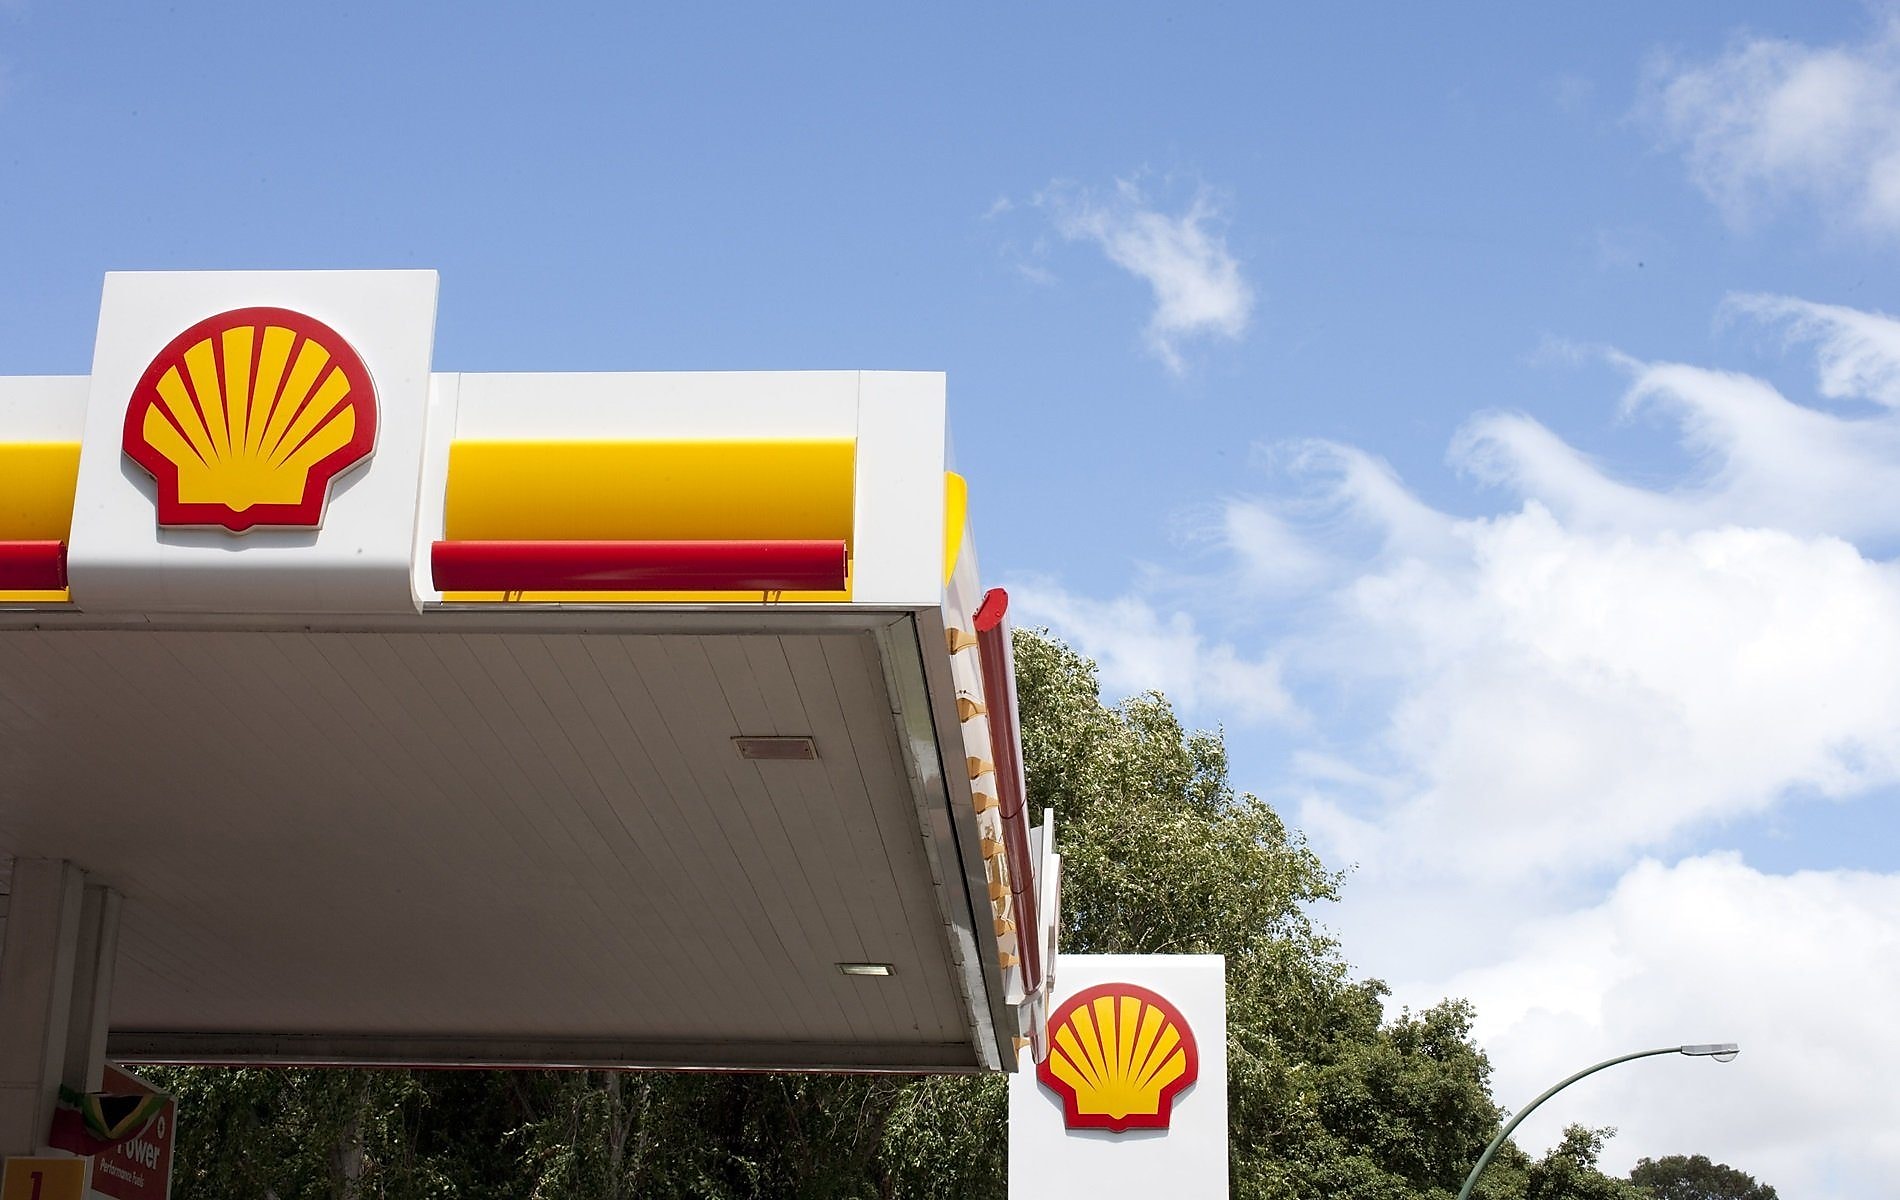 new shell station near me